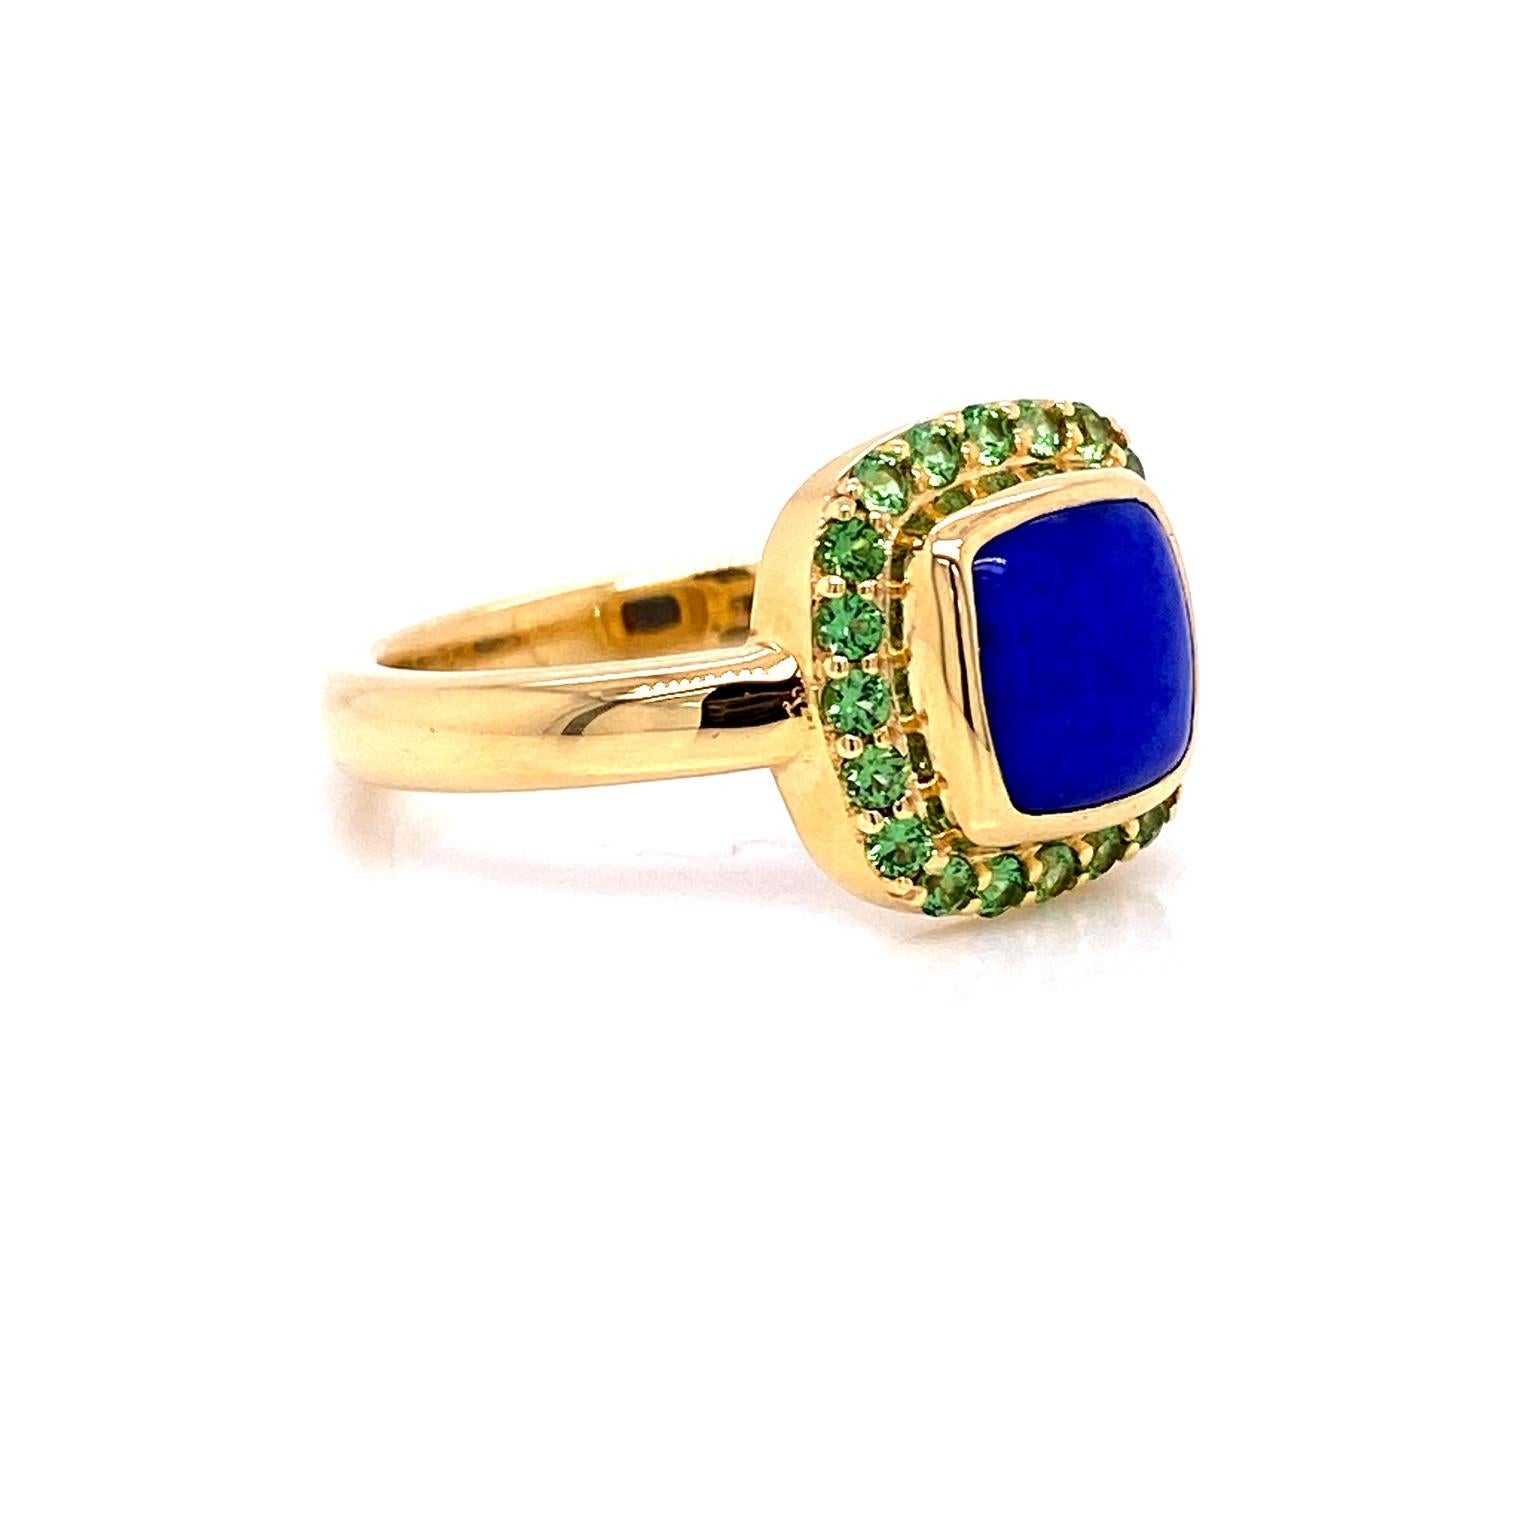 An 18k yellow gold ring set with one 7.39mm x 7.44mm Lapis Lazuli cushion shaped cabochon, and twenty 1.5mm Tsavorite garnets, .30 total carat weight. Ring size 6.75. This ring was made and designed by llyn strong.